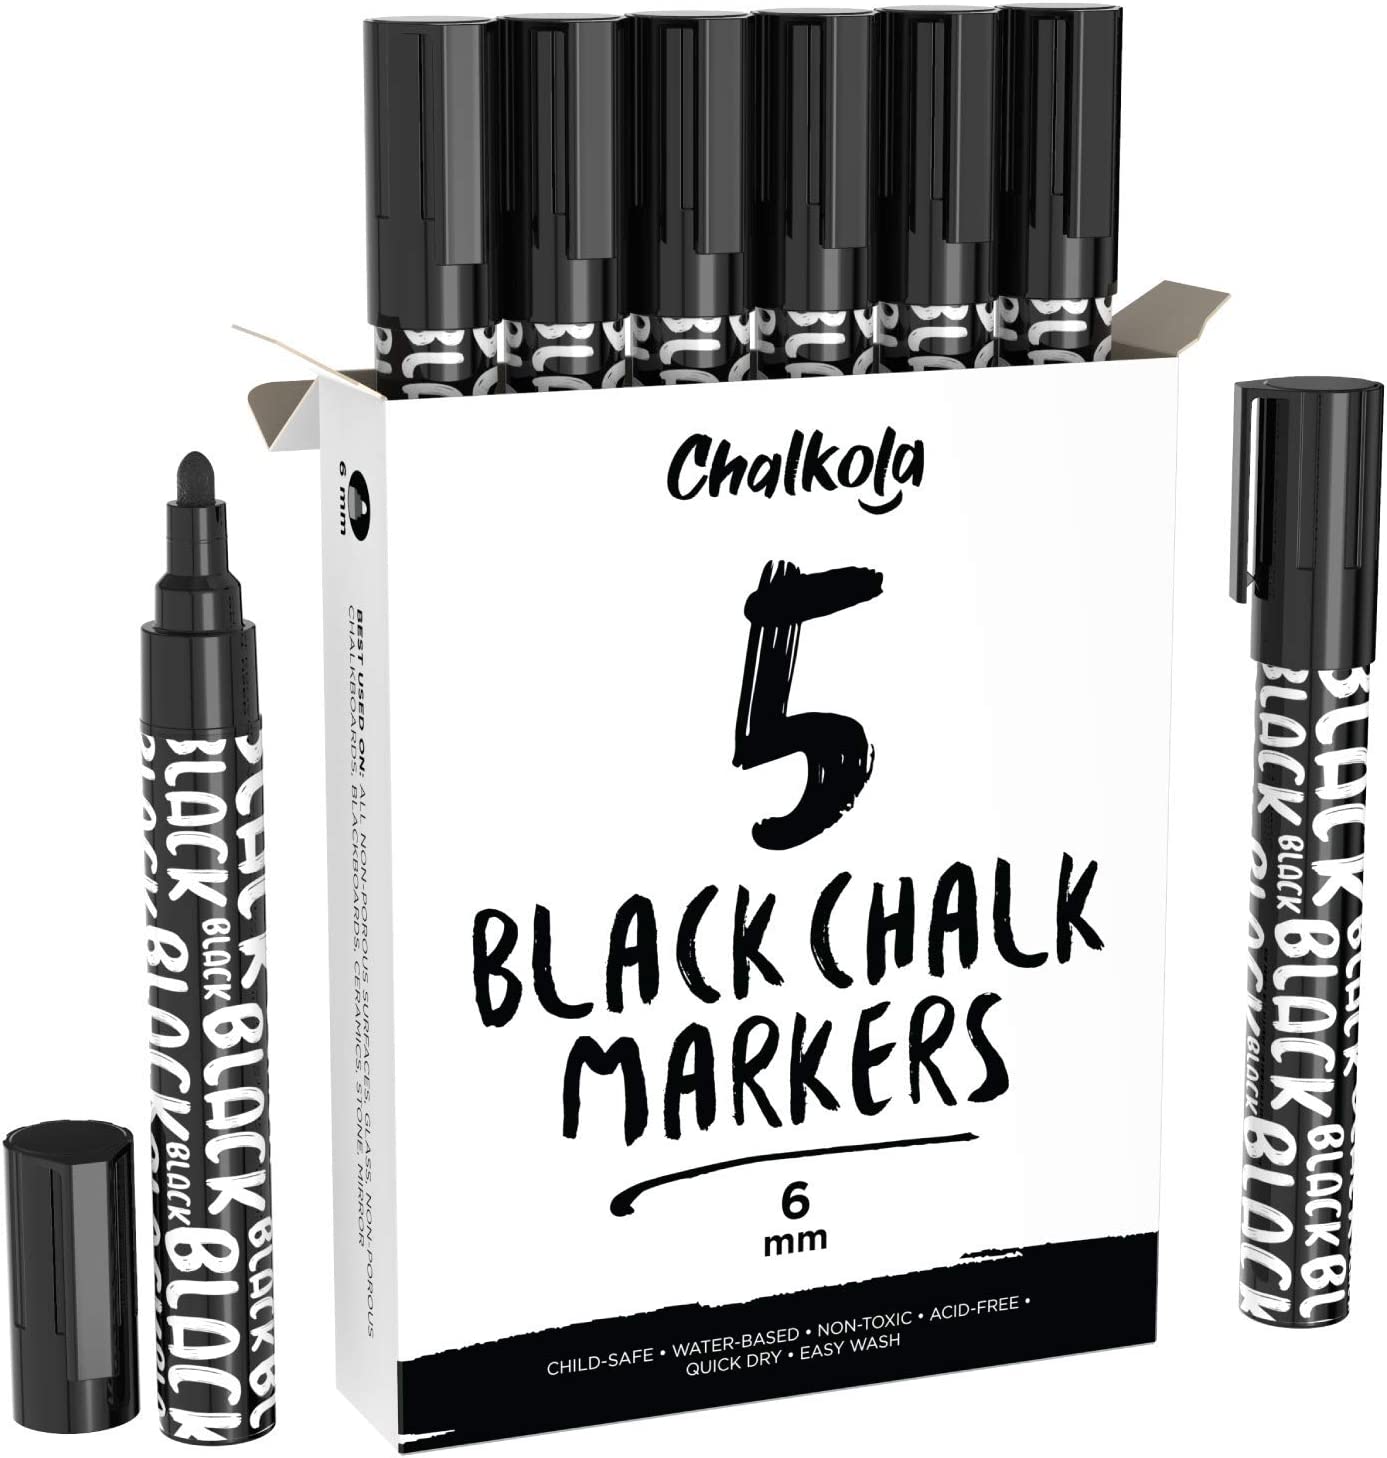 Art projects for kids : chalk blocks with liquid chalk markers